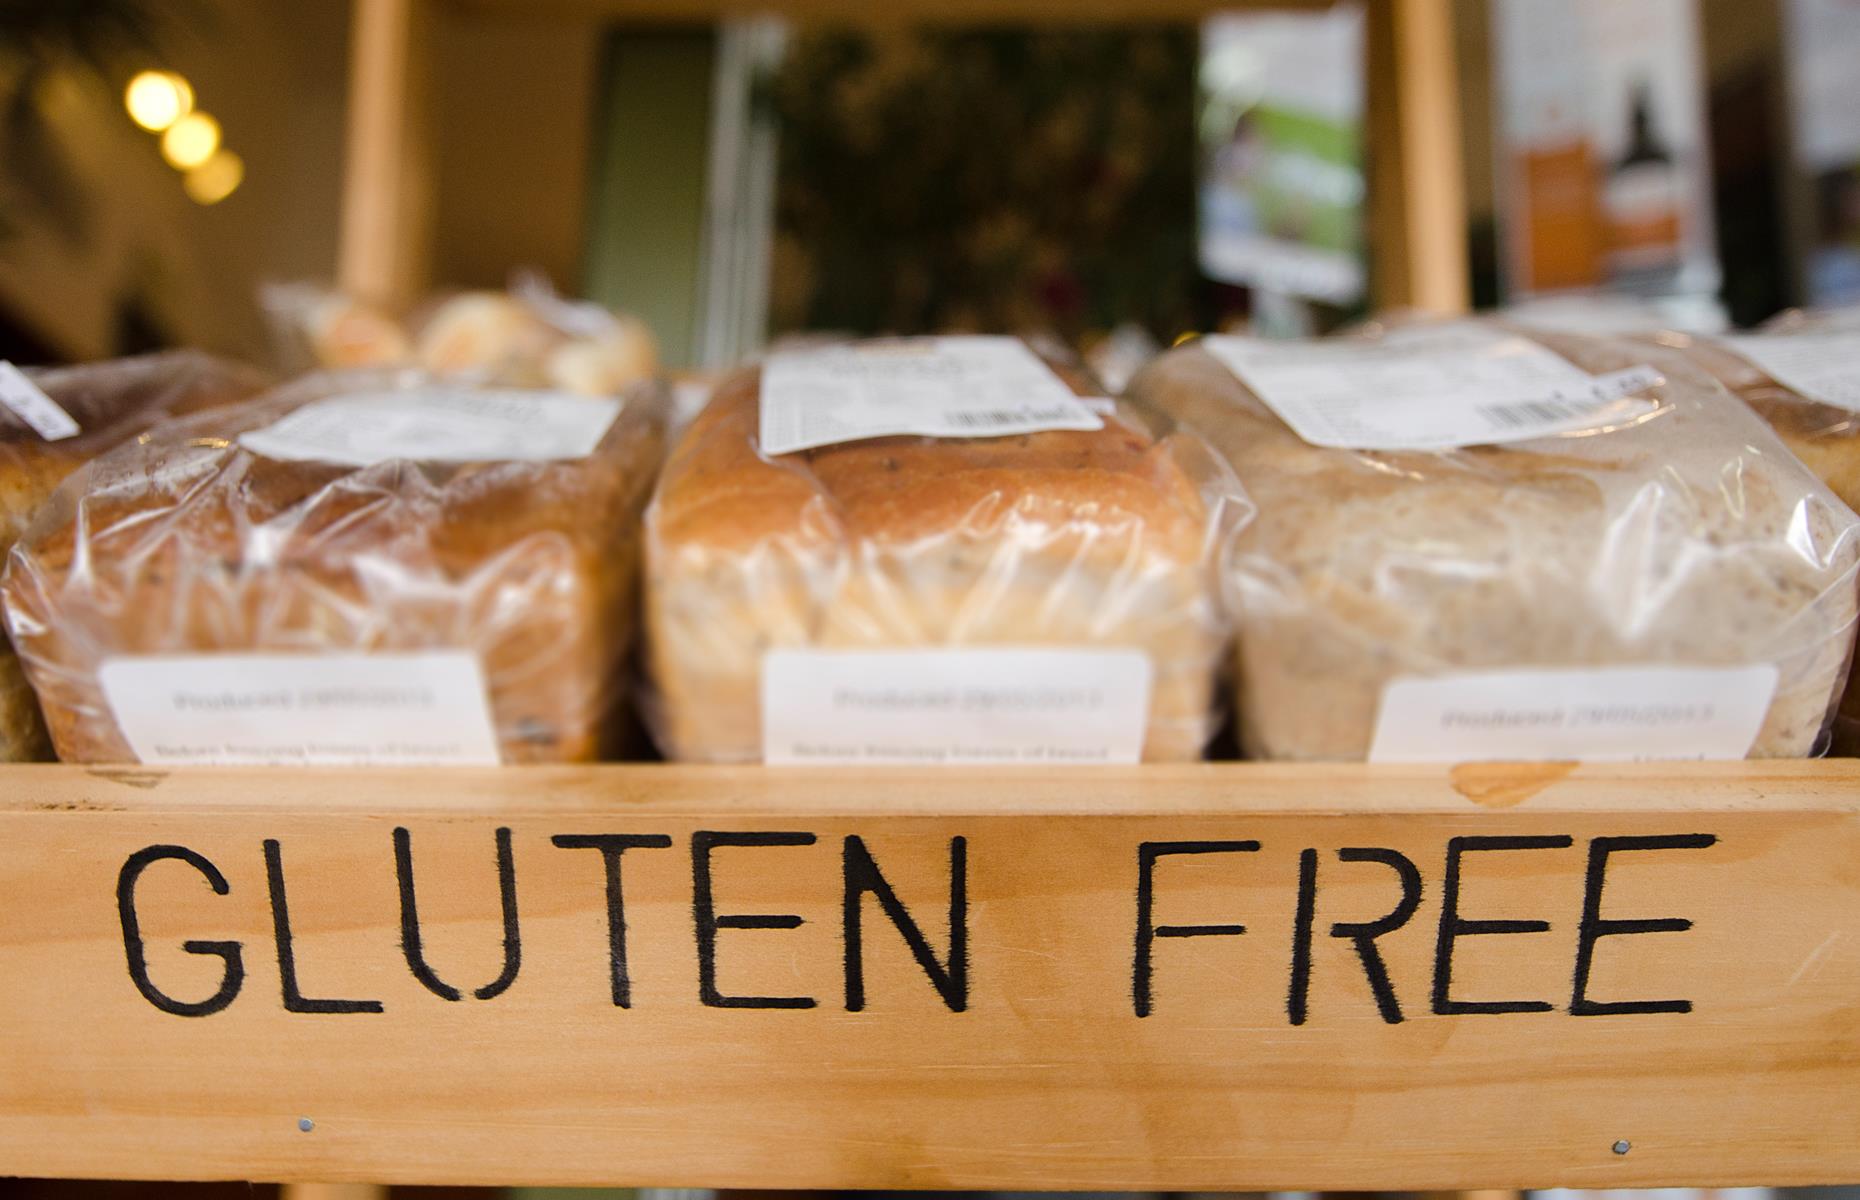 We should all go gluten-free 